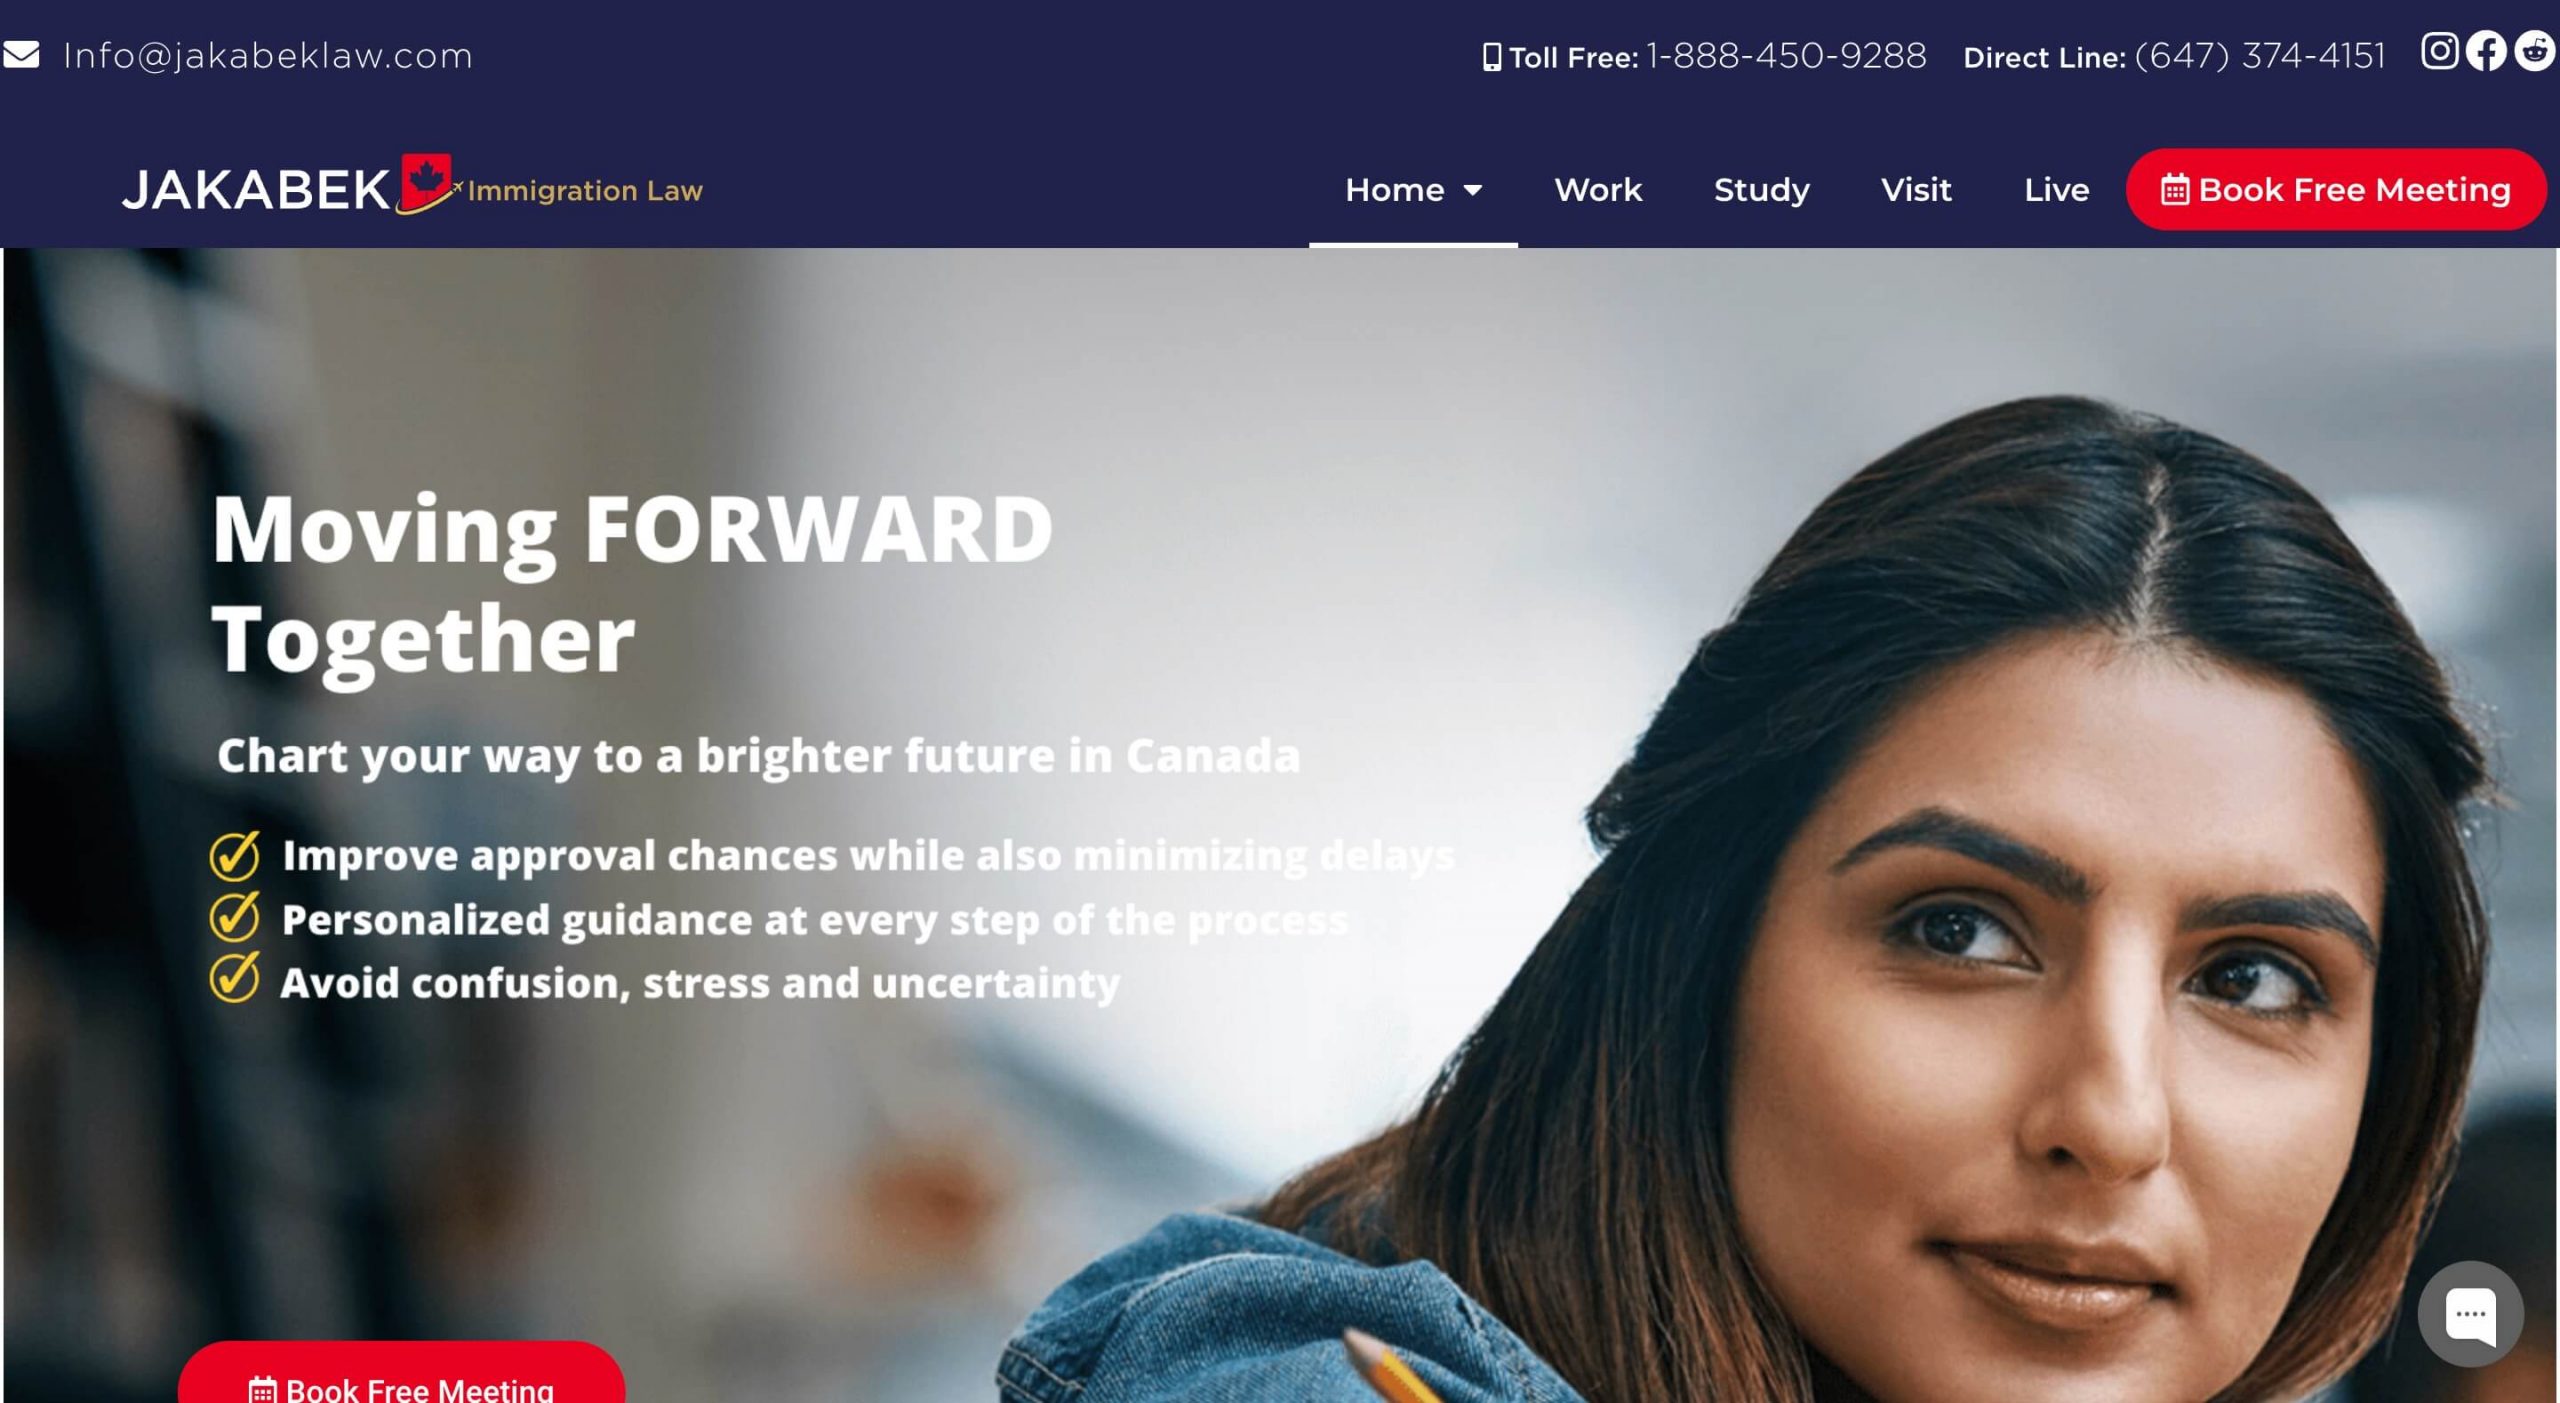 An immigration law firm website in Toronto, ON